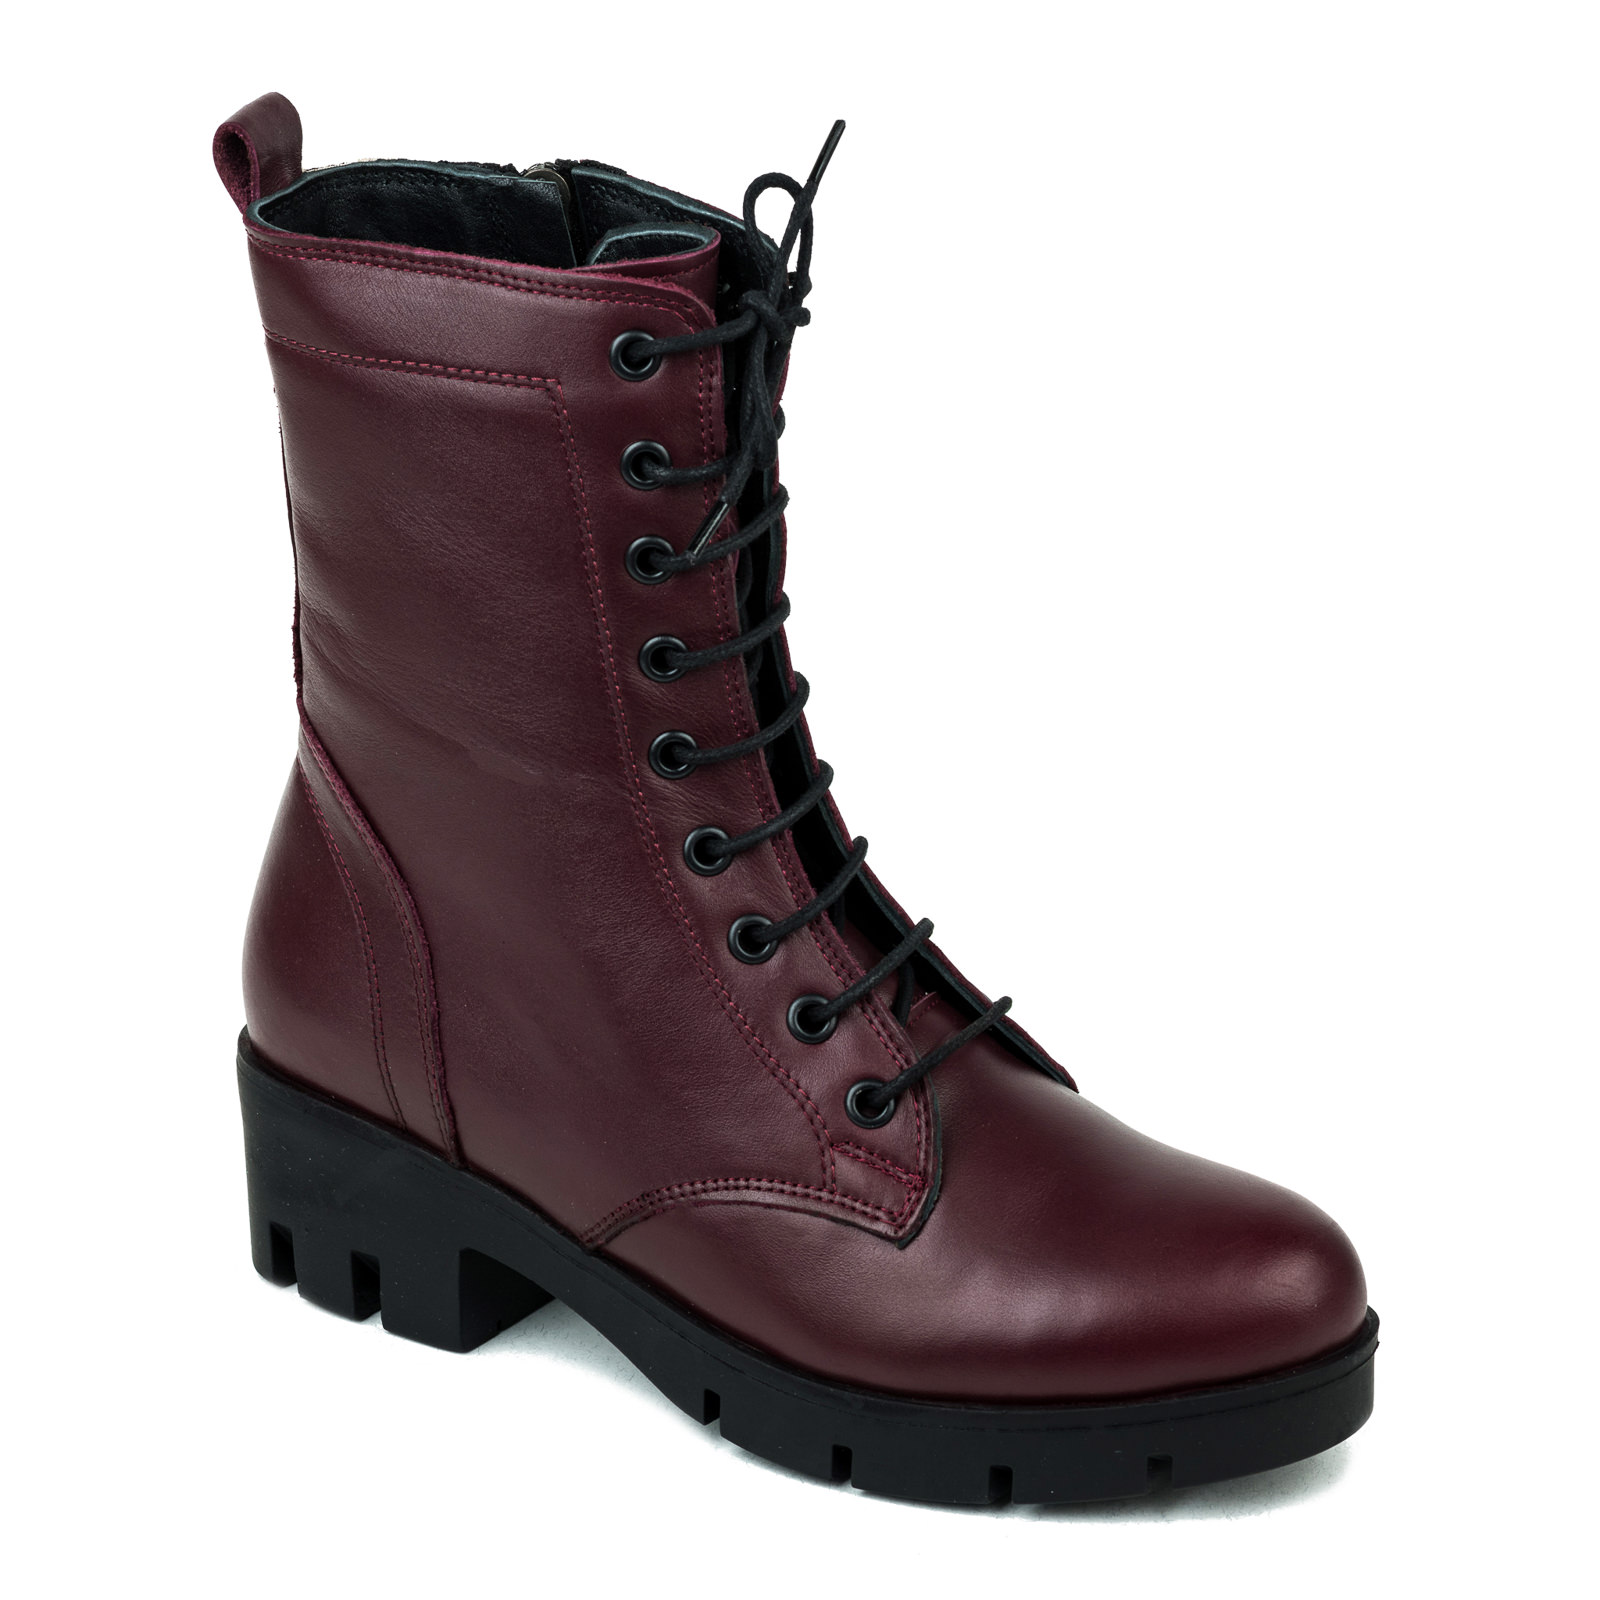 Leather ankle boots B054 - WINE RED